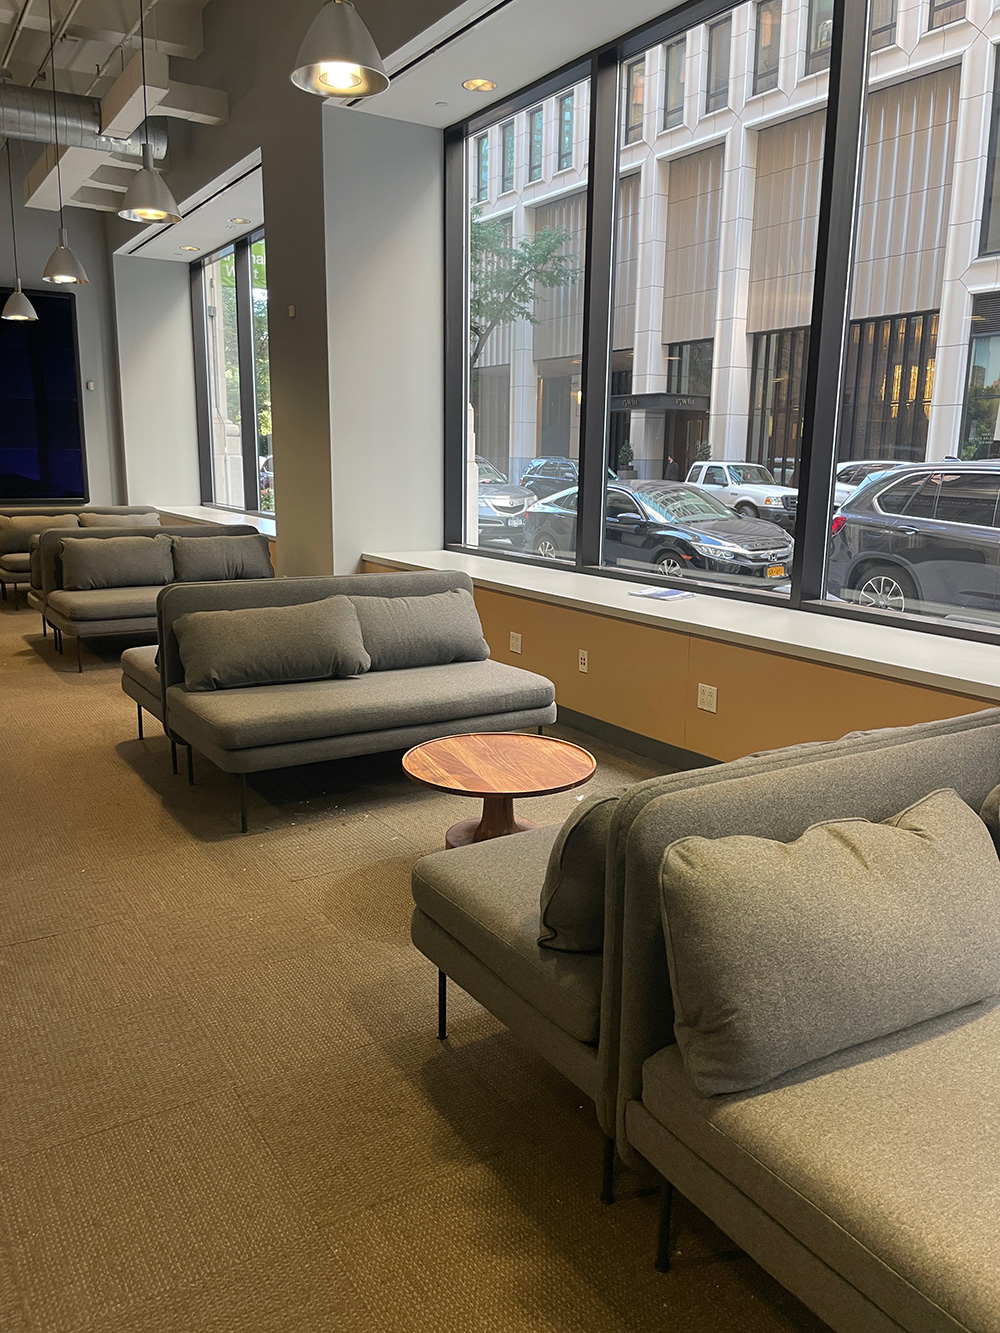 A campus lounge at 16 W. 61st St. on the New York City campus